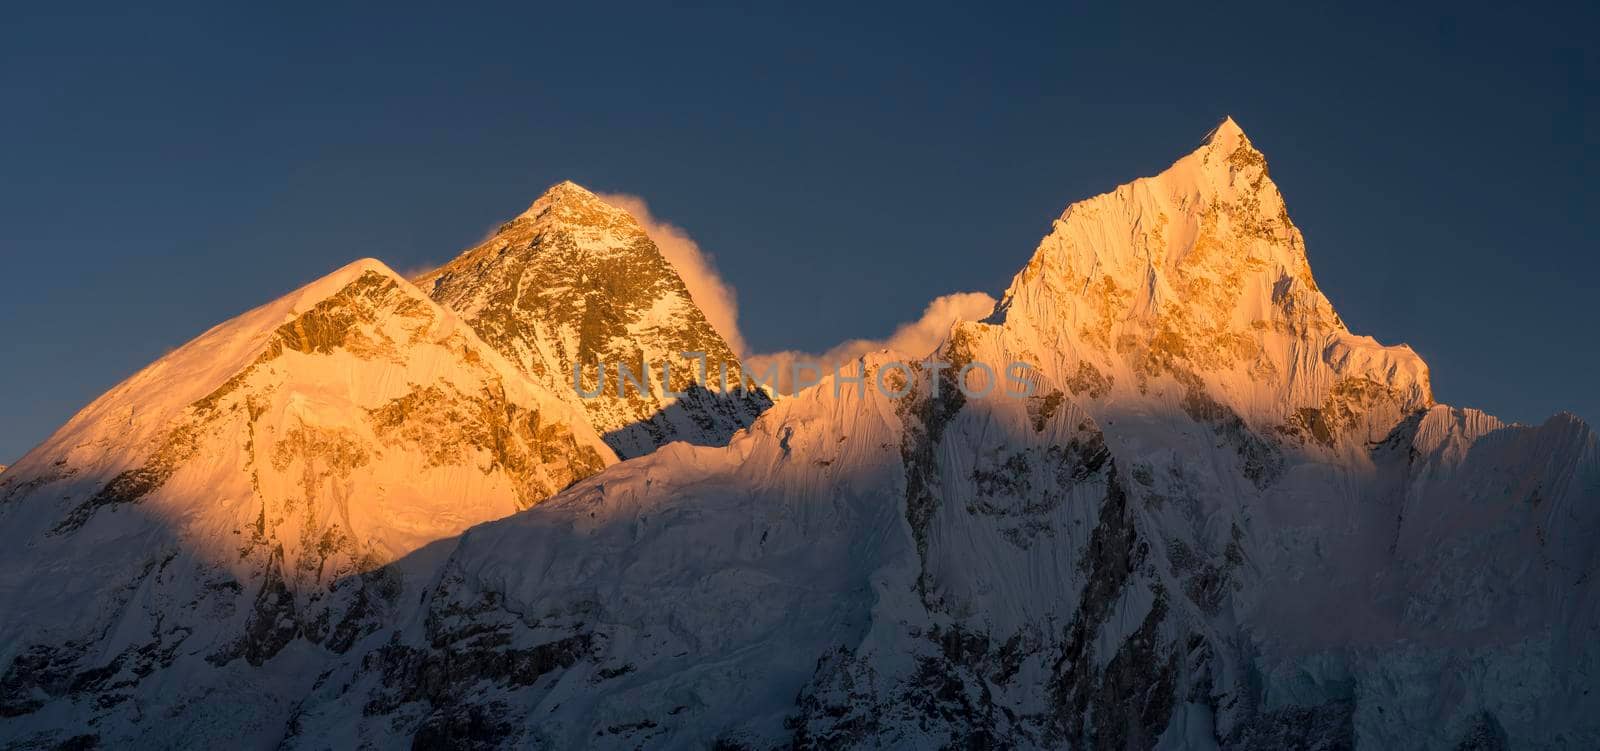 Everest and Nuptse summits at sunset or sunrise in Nepal by Arsgera